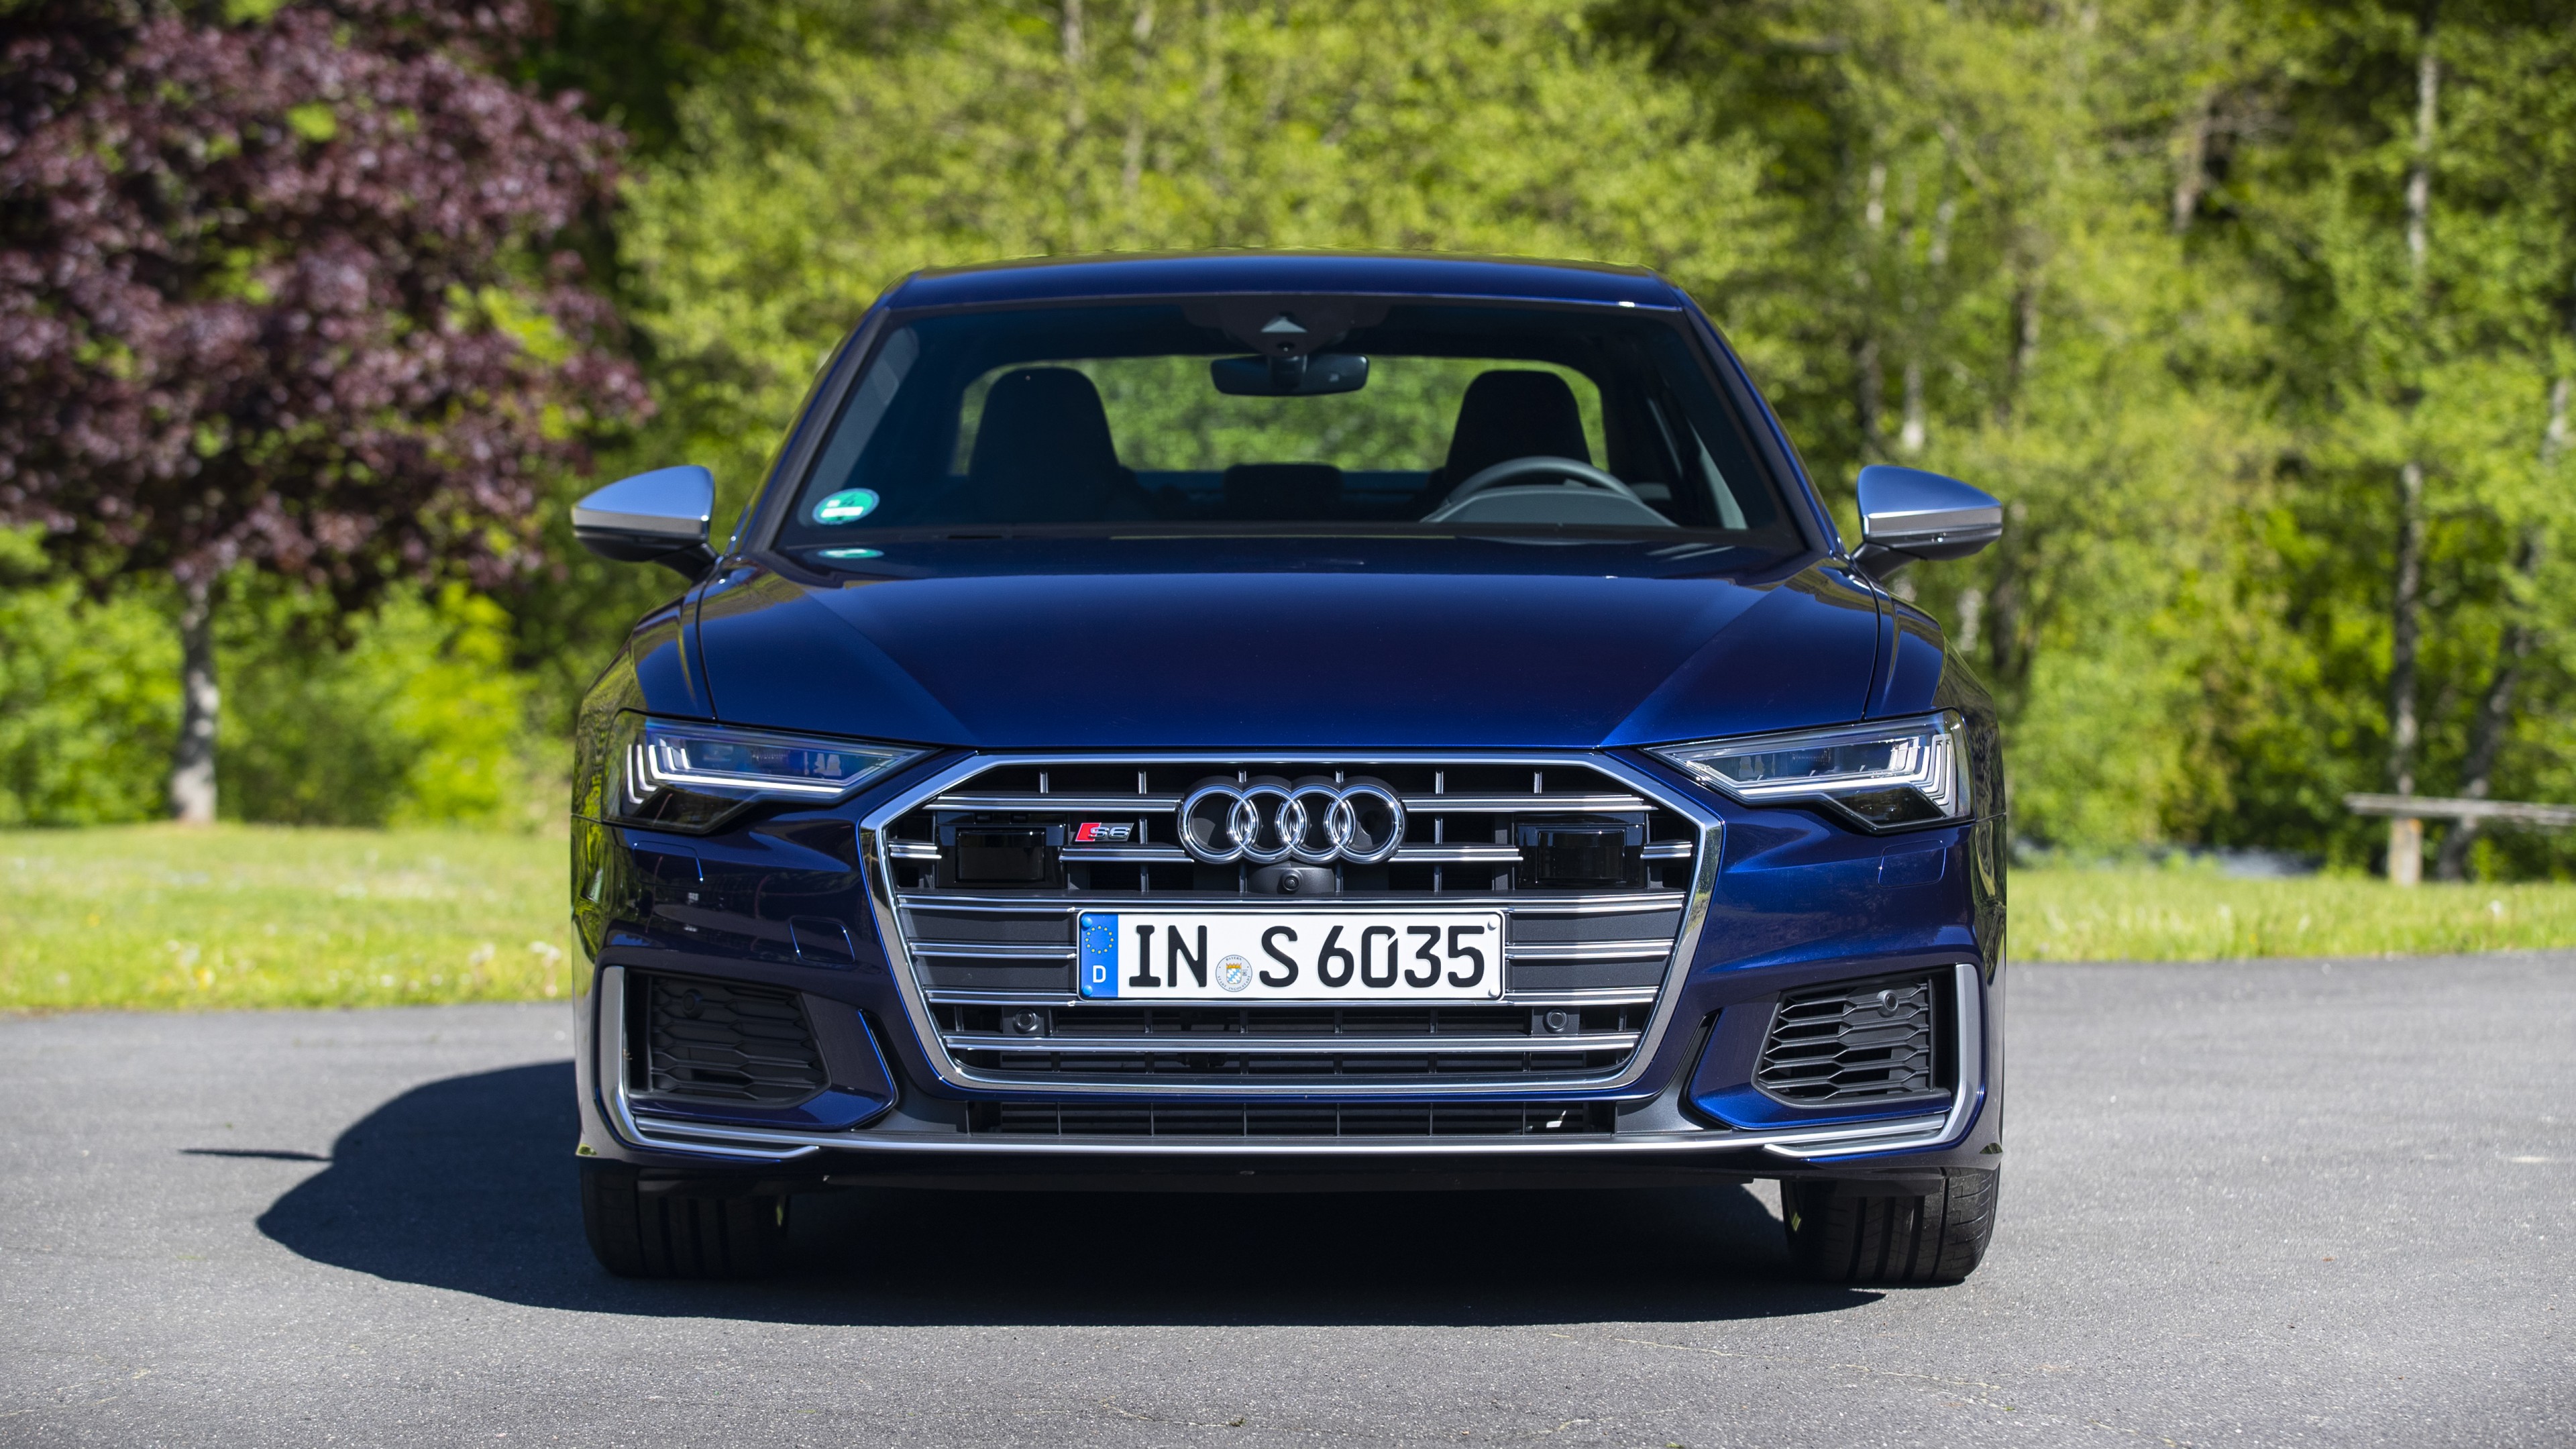 Audi S6 exterior restyling